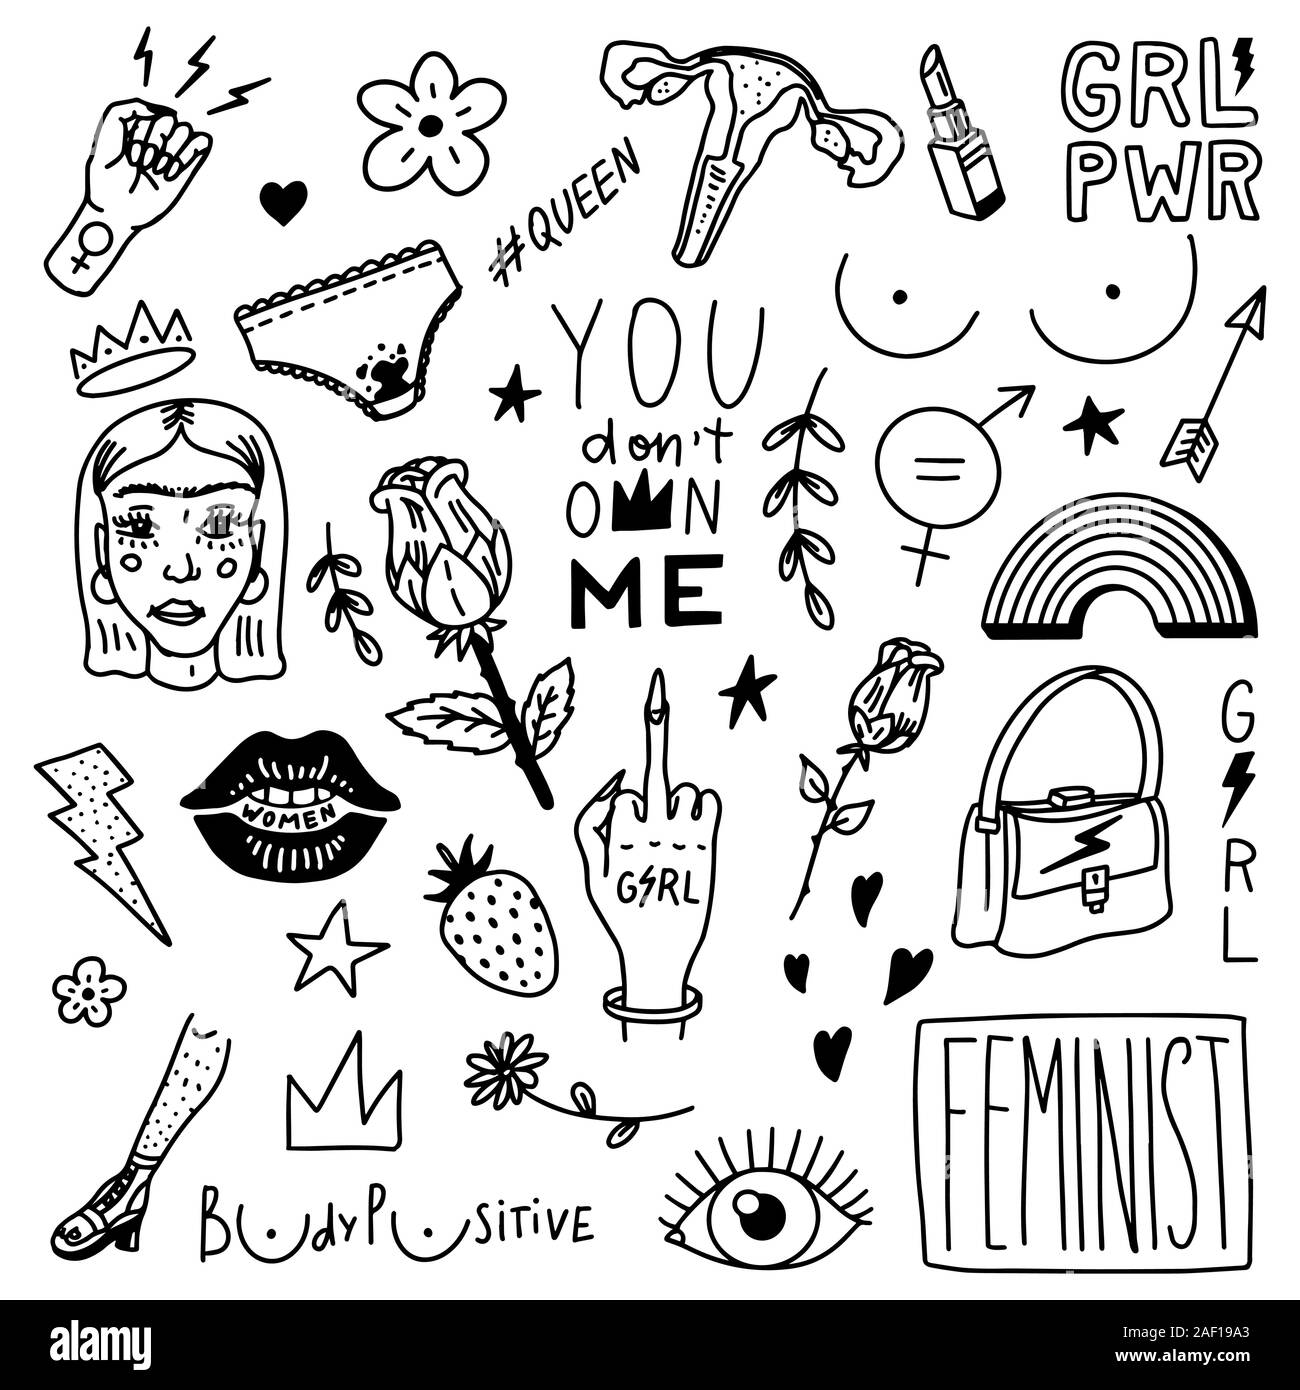 Feminist set in vintage style. Girl power and body positive concept. Stickers for posters and cards. Slogans and gestures, hairy legs, cervix Stock Vector